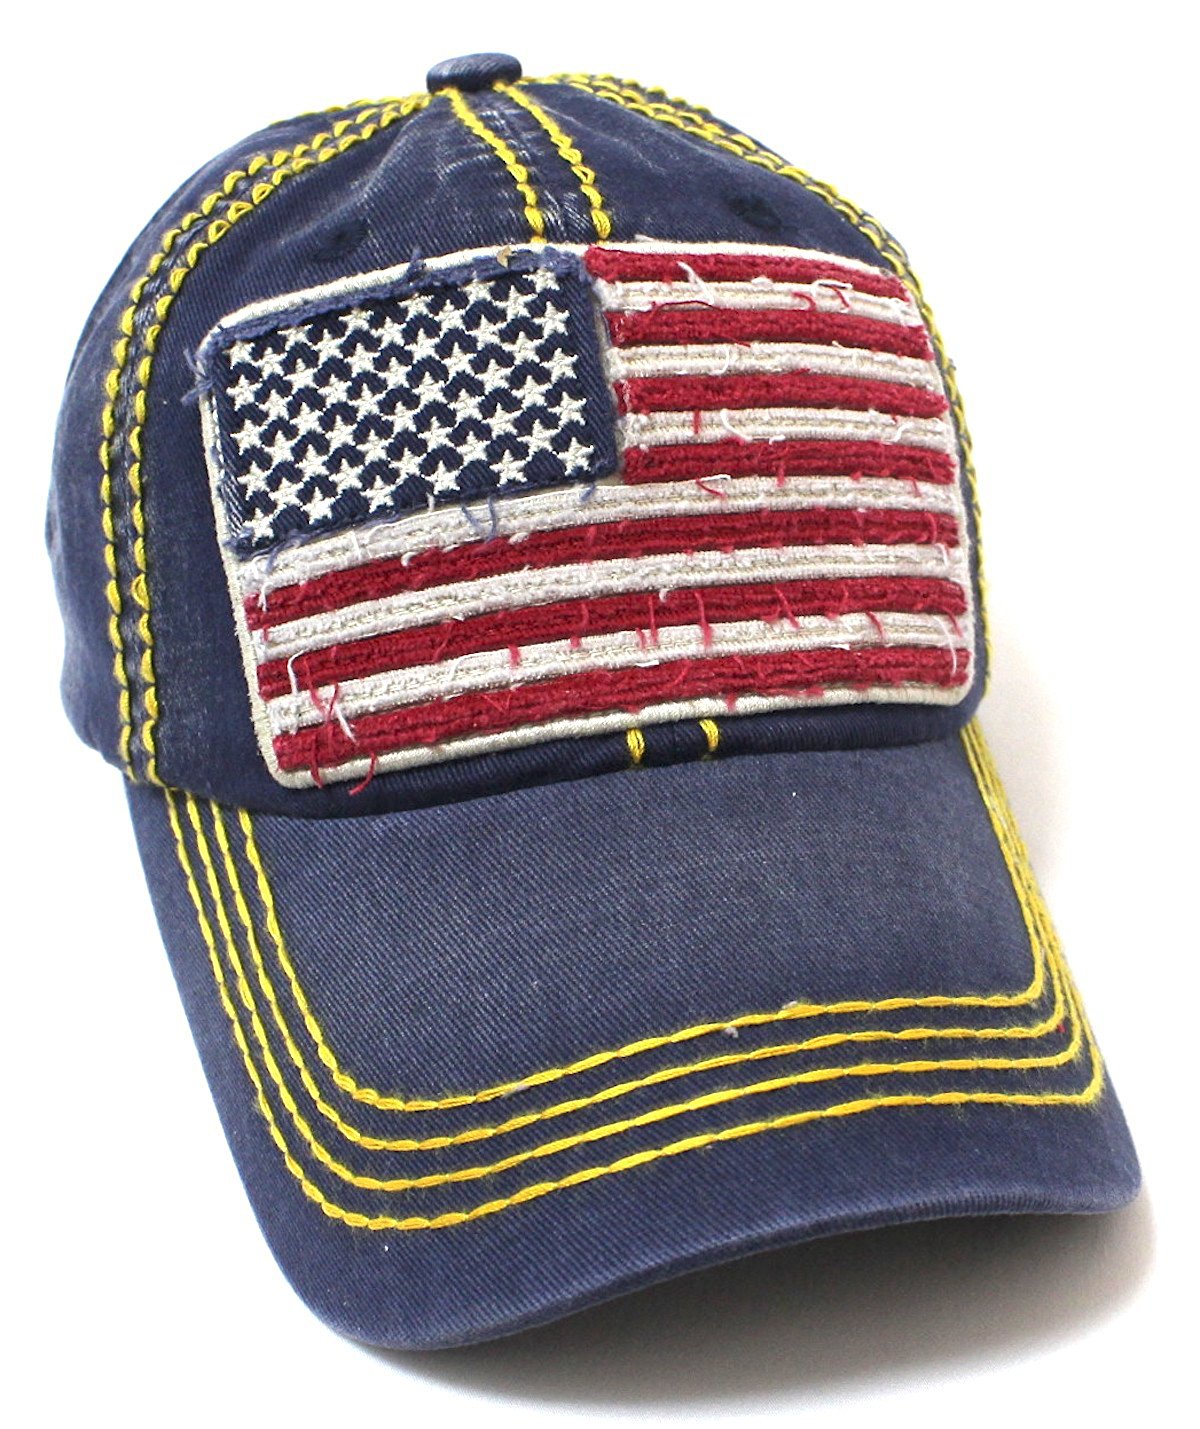 Navy Oversized USA Flag Patch Embroidery Ballcap - Caps 'N Vintage 